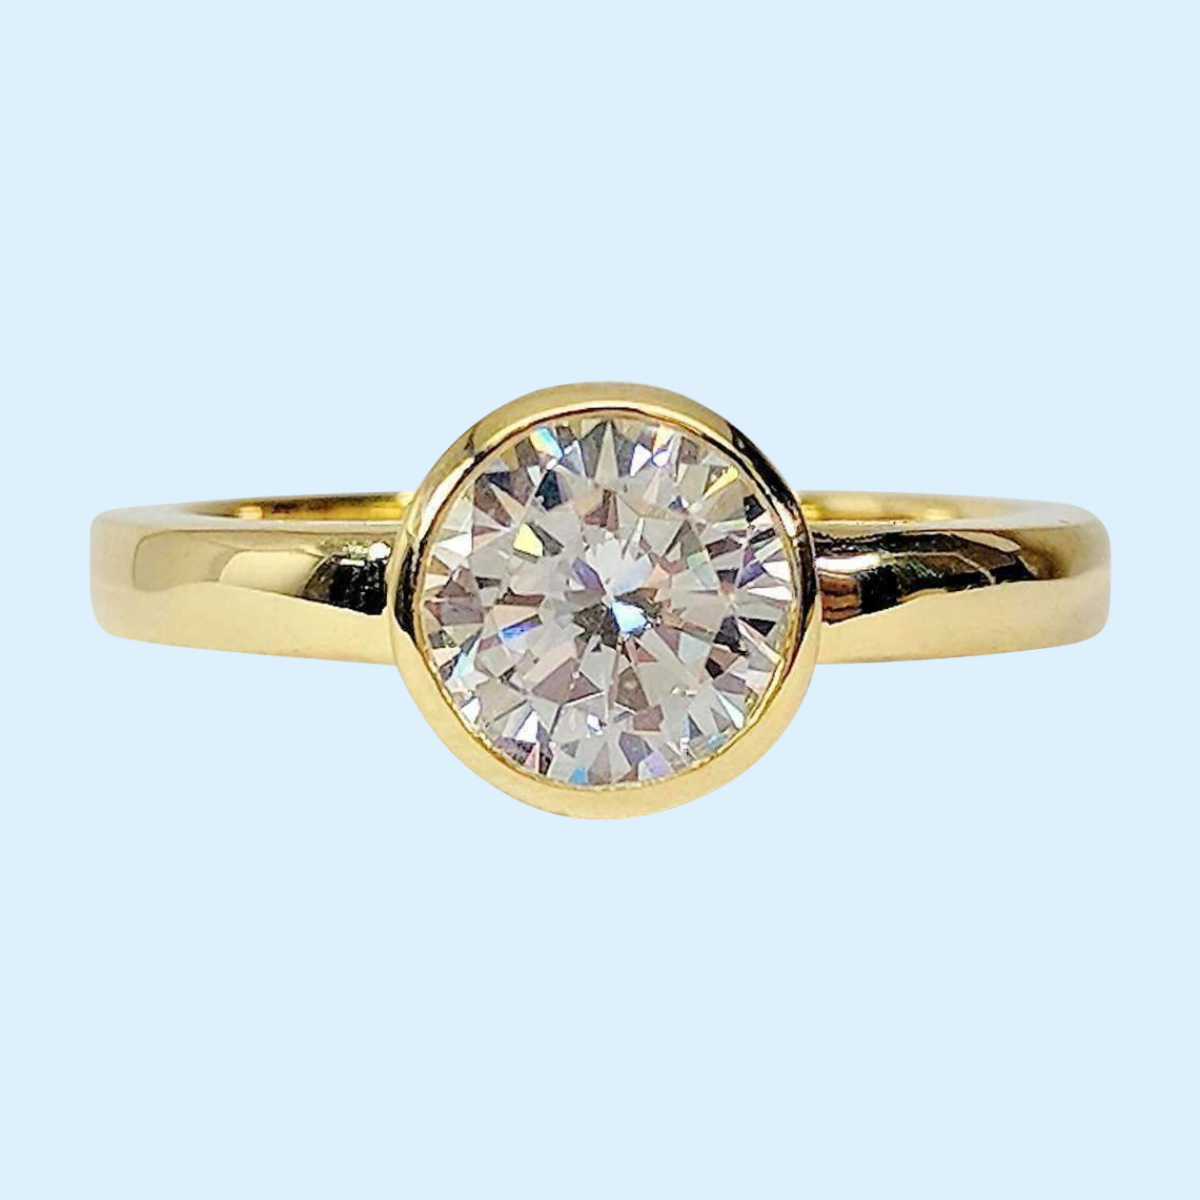 Coco D'ora 1.25CT Round Bezel Set IOBI Simulated Diamond Solitaire 18K Gold over Sterling Silver Ring for Women